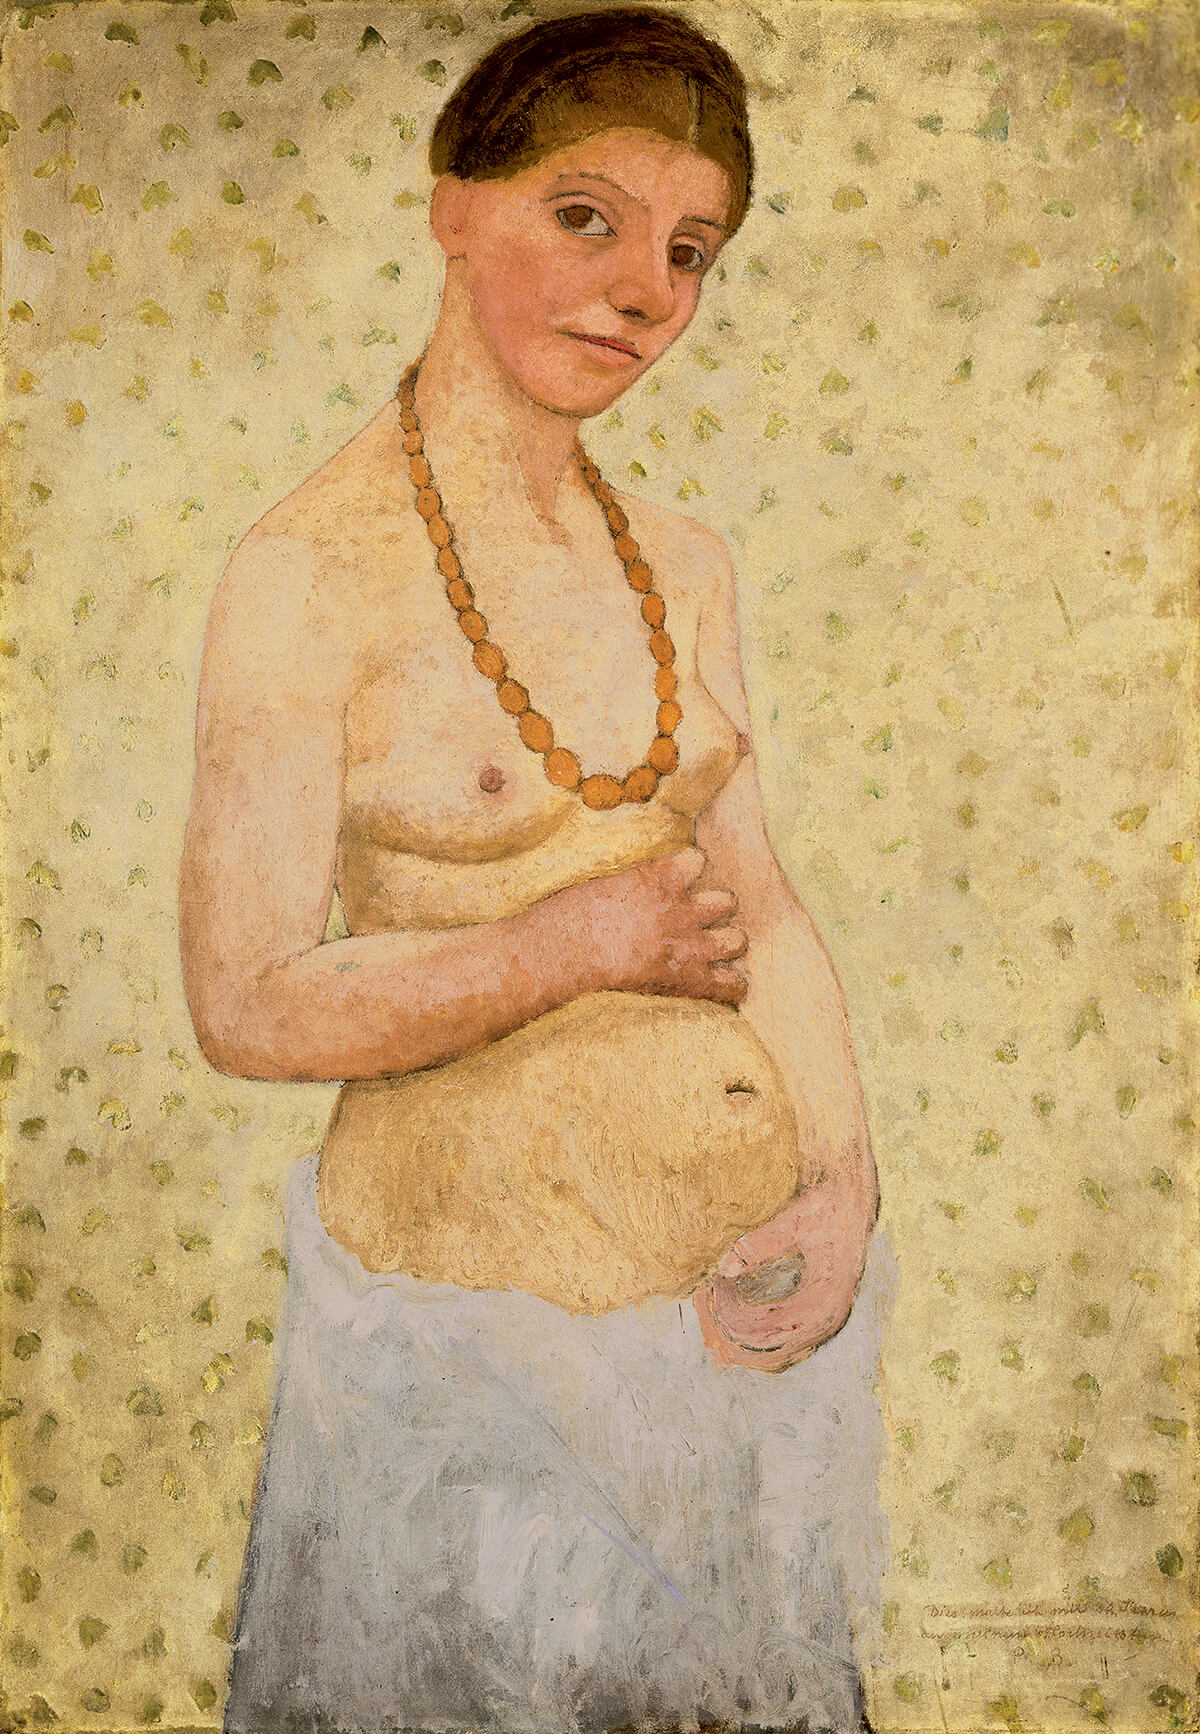 Paula Modersohn-Becker, <em>Self-Portrait, Age 30, 6th Wedding Day,</em> 1906. The painting is considered the first full-figure nude self-portrait by a woman in western art.